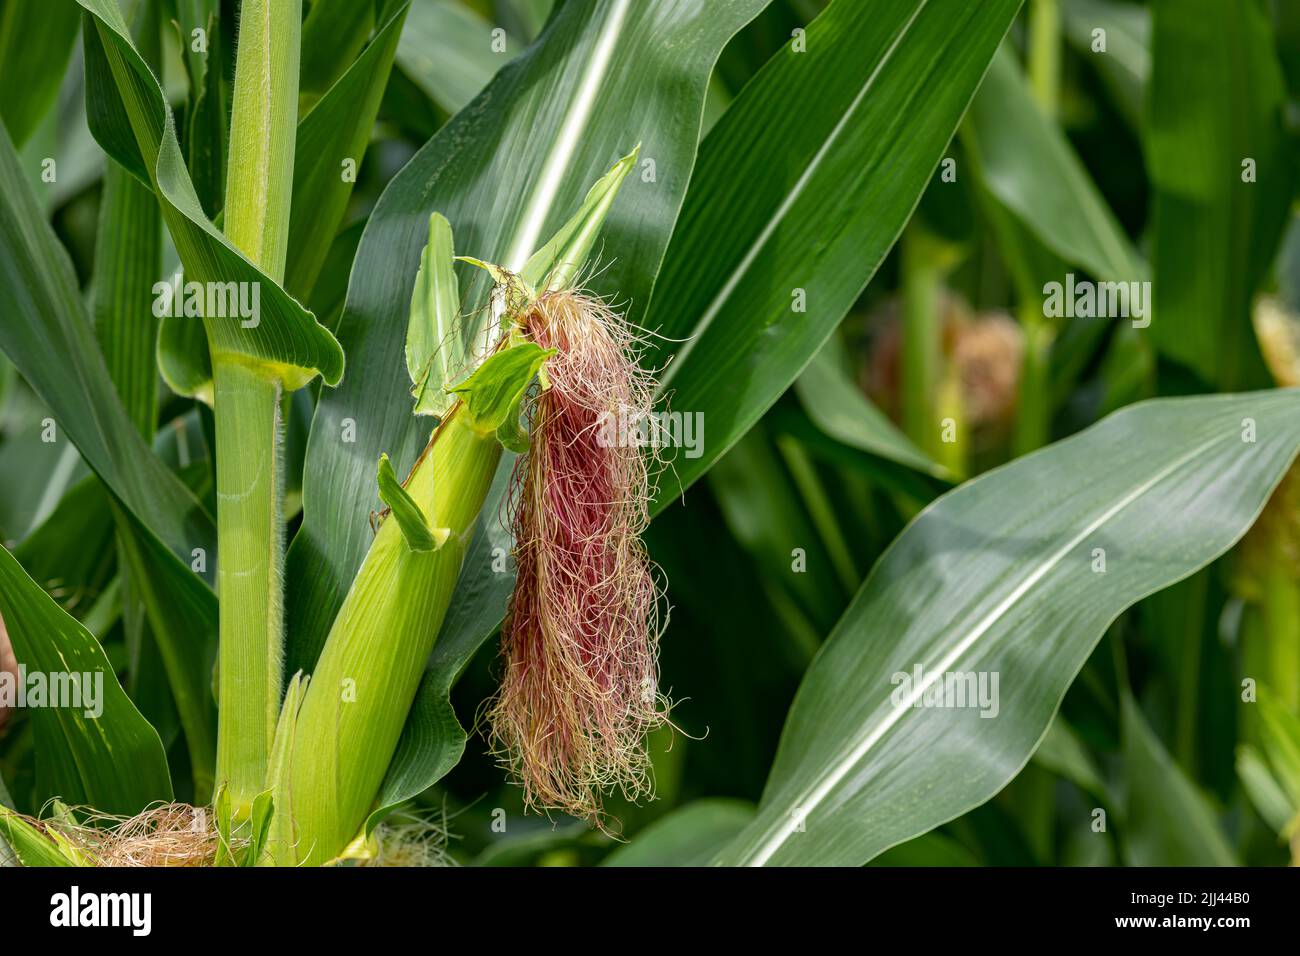 Cornfield with corn ear and silk growing on cornstalk. Ethanol, farming and agriculture concept Stock Photo